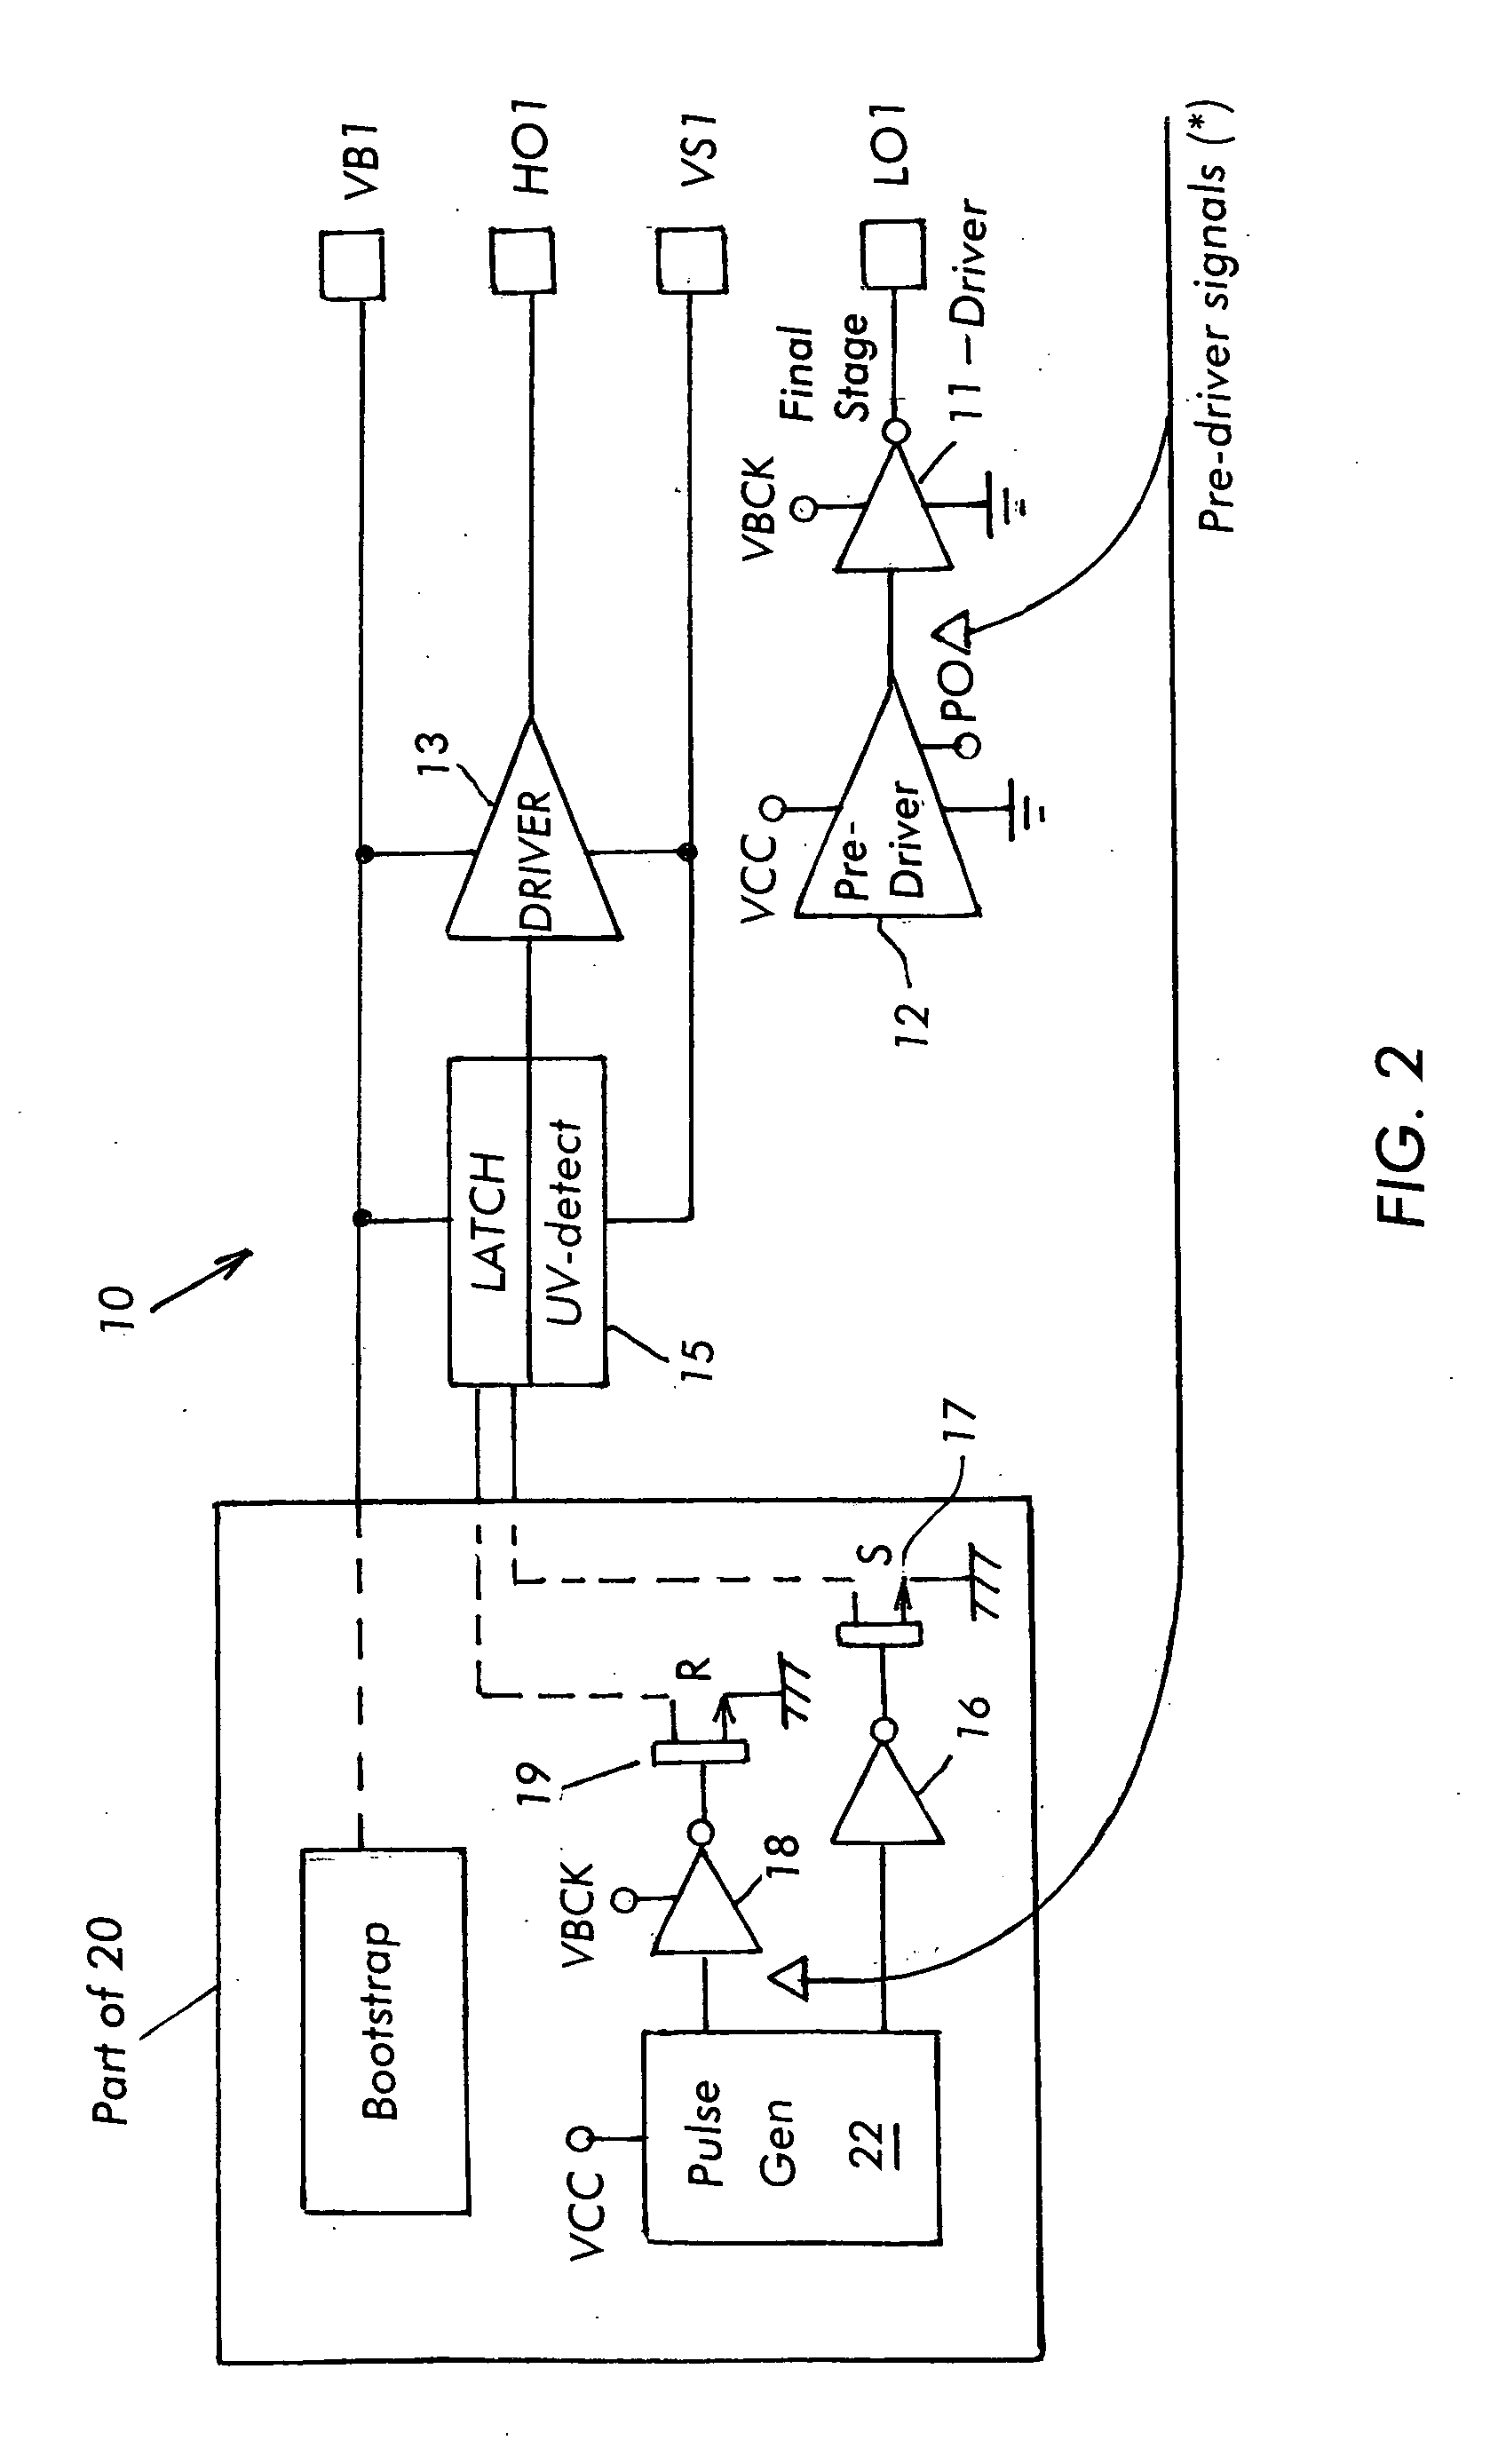 Protection circuit for permanent magnet synchronous motor in filed weakening operation